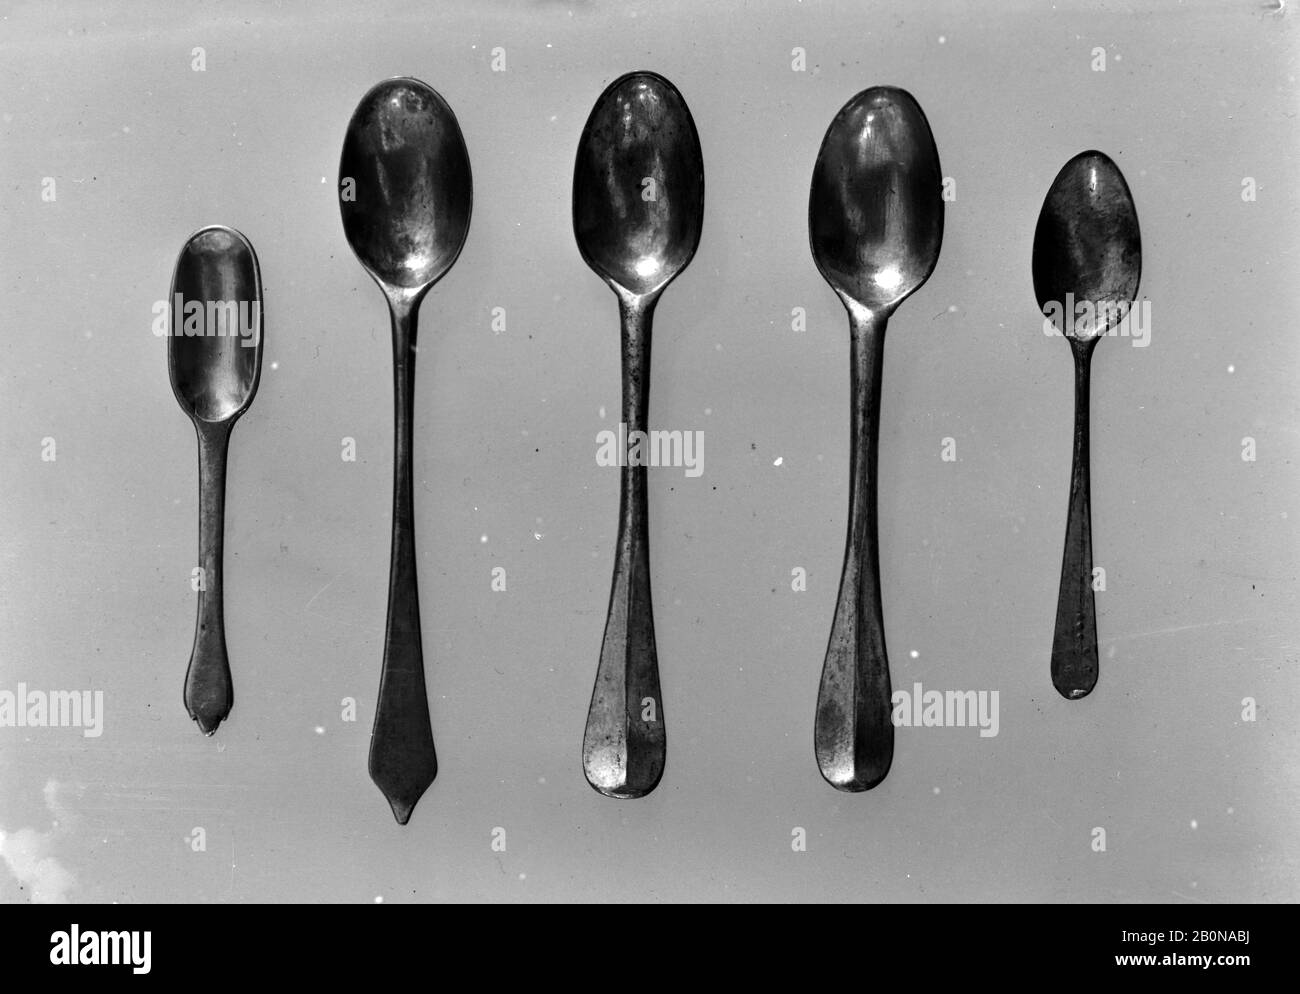 What are Tiny Spoons Used for in the Drug World?